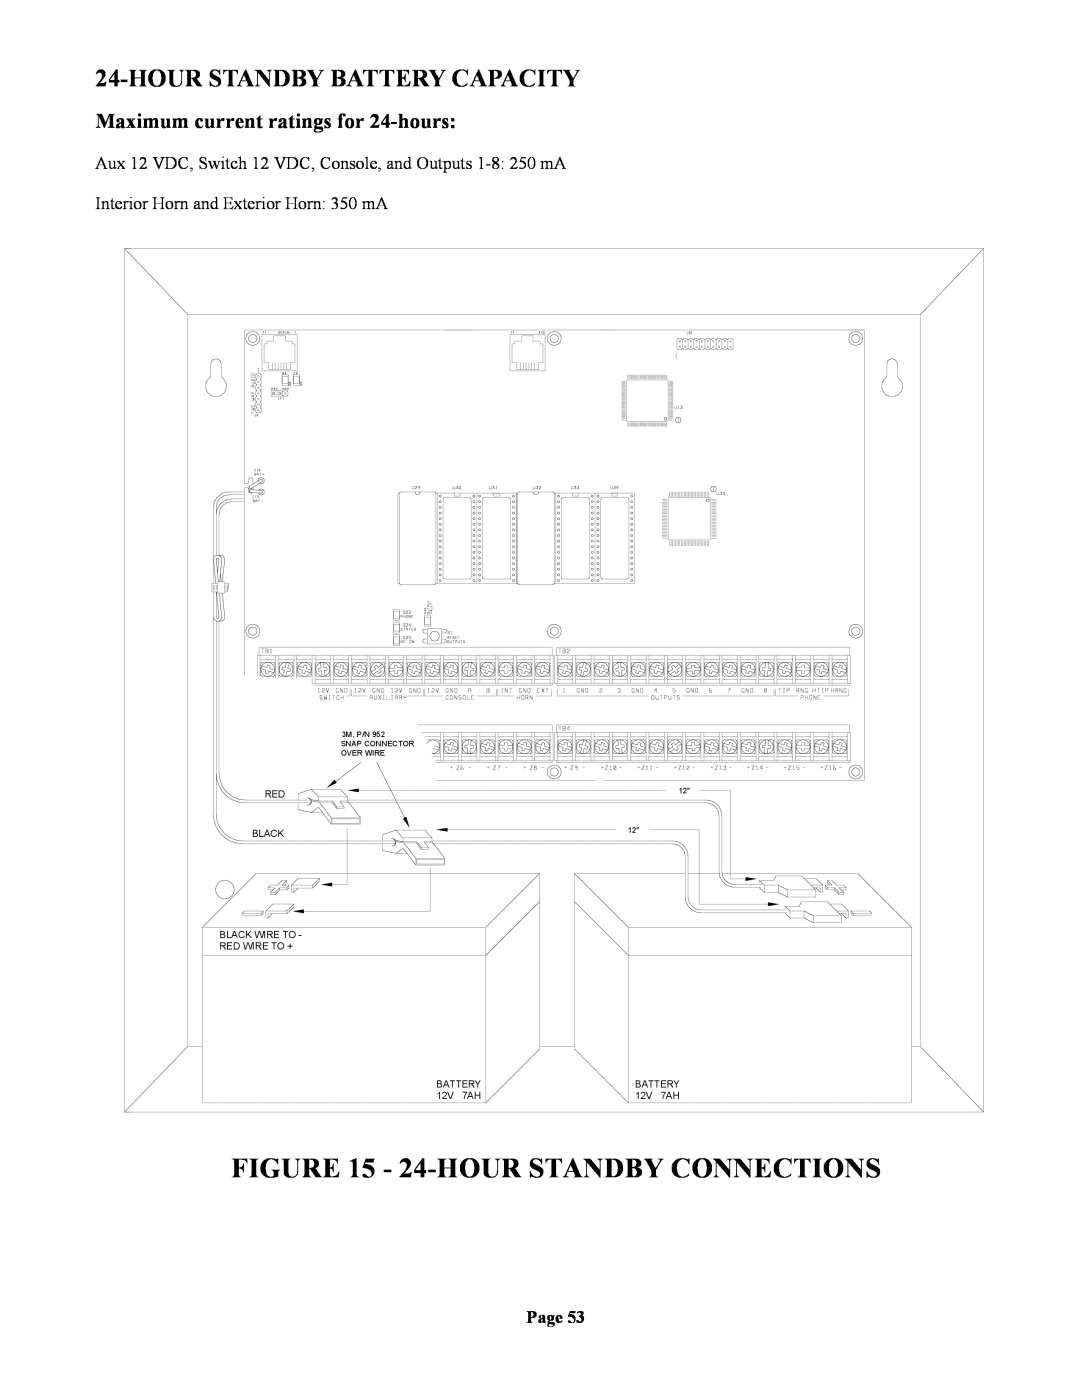 Home Automation 20A00-1 installation manual 24-HOURSTANDBY CONNECTIONS, Hourstandby Battery Capacity, Page 